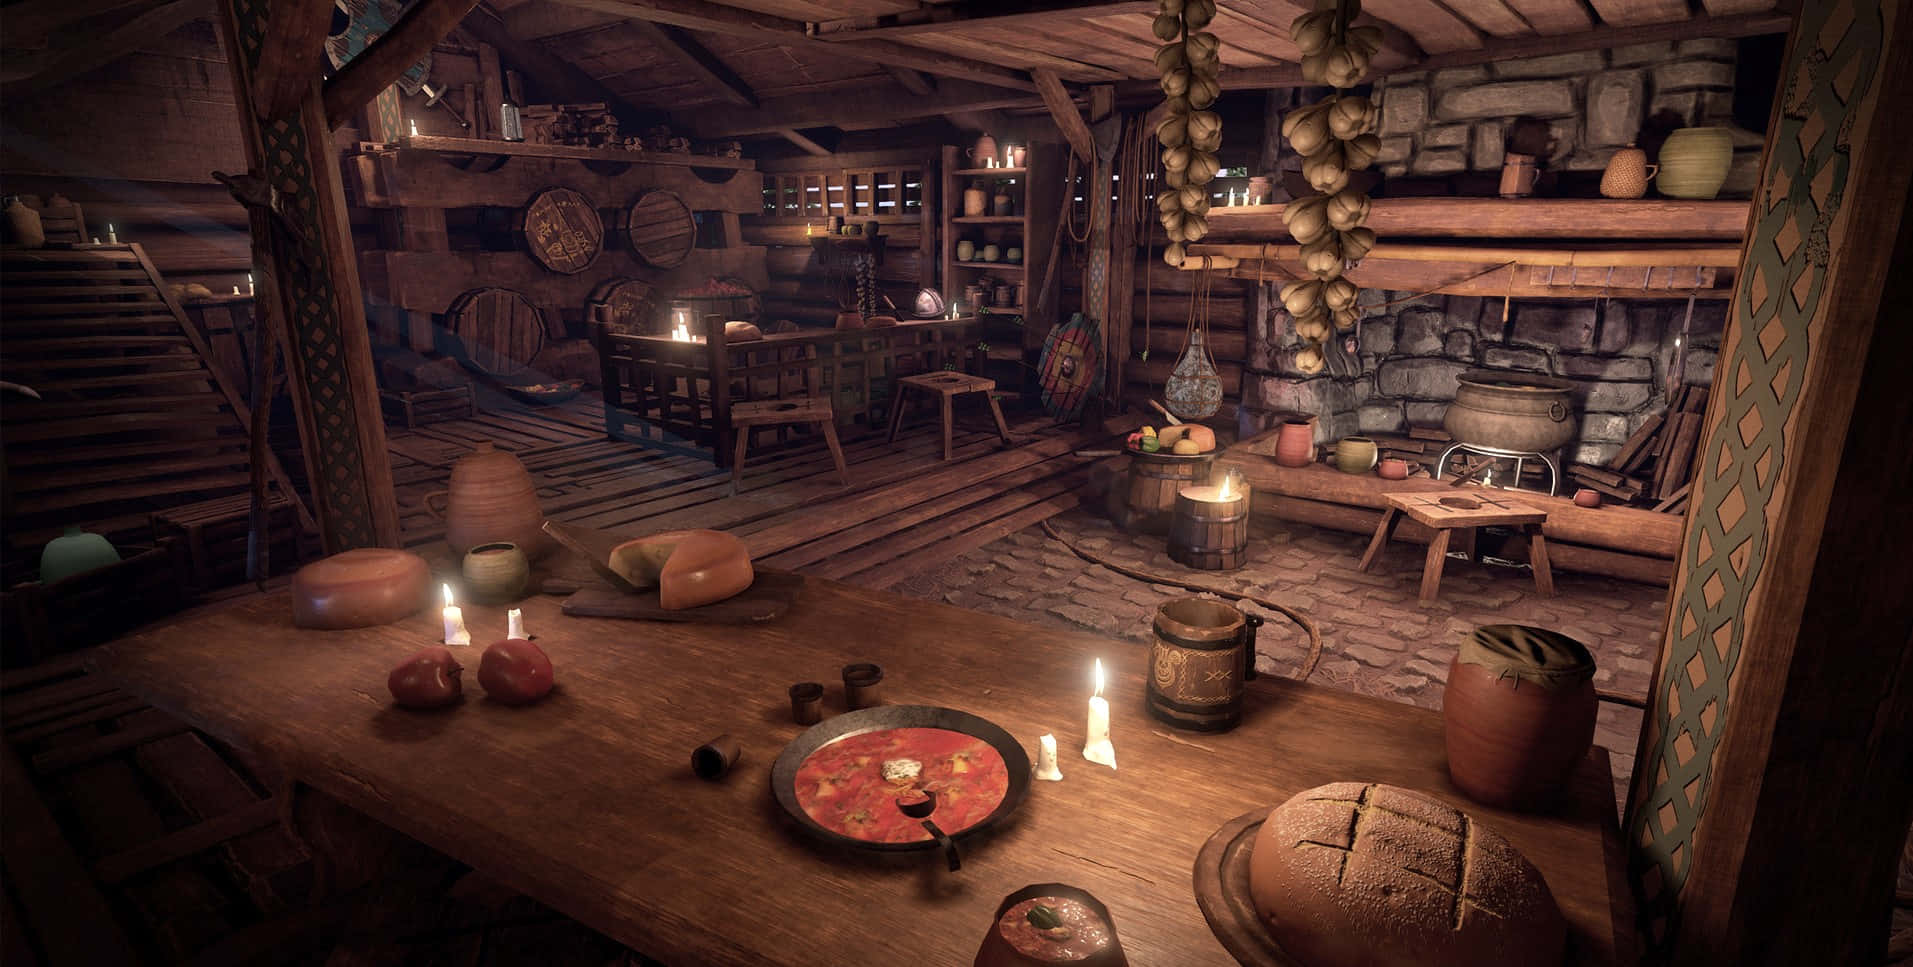 Relax and Unwind in Our Cozy Tavern